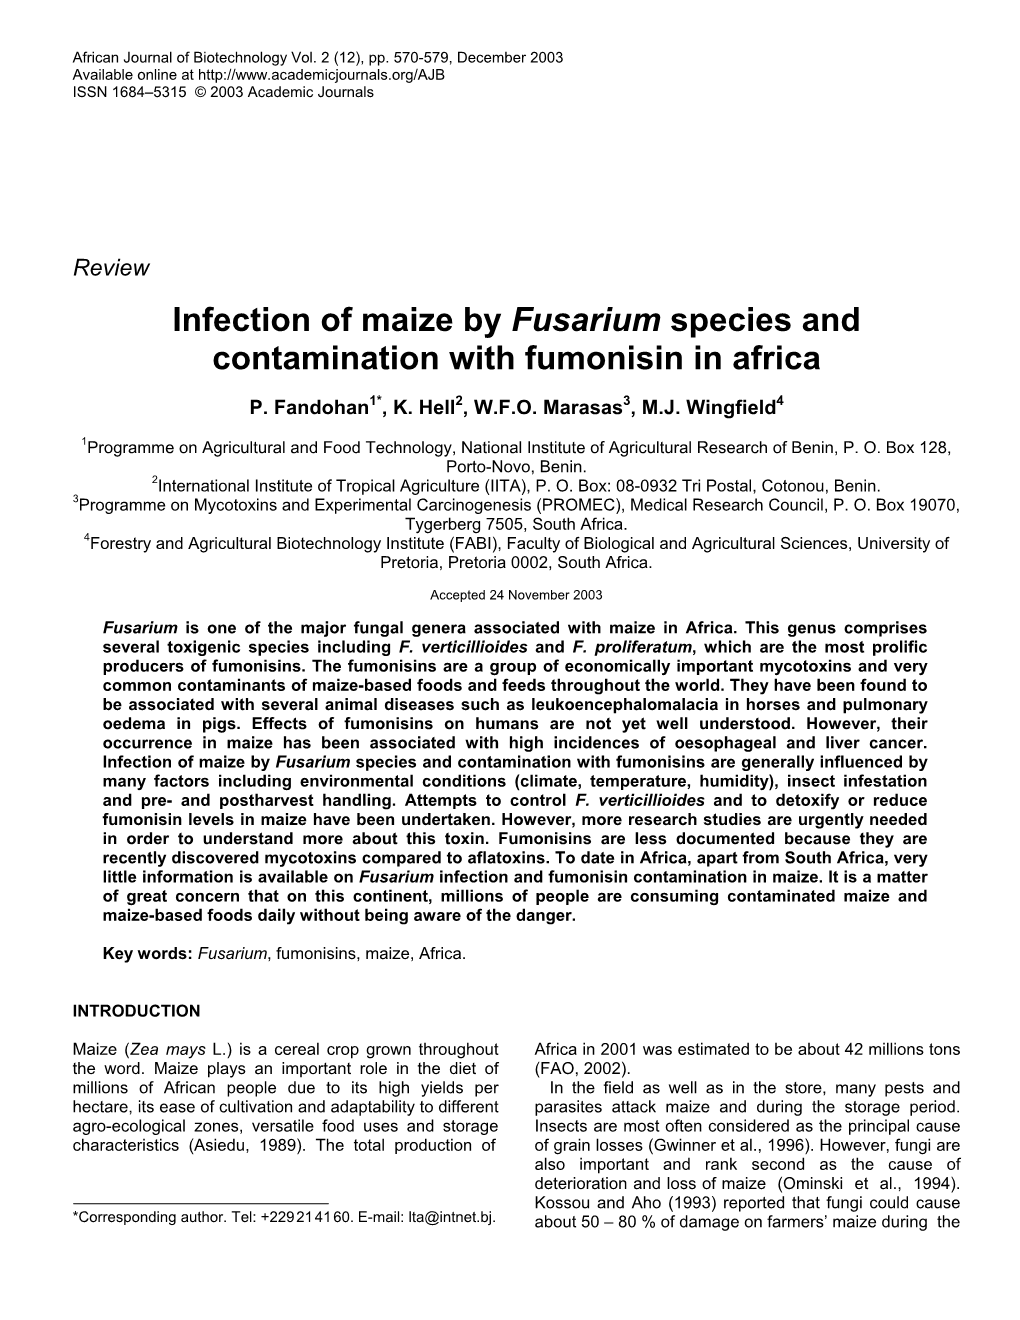 Infection of Maize by Fusarium Species and Contamination with Fumonisin in Africa